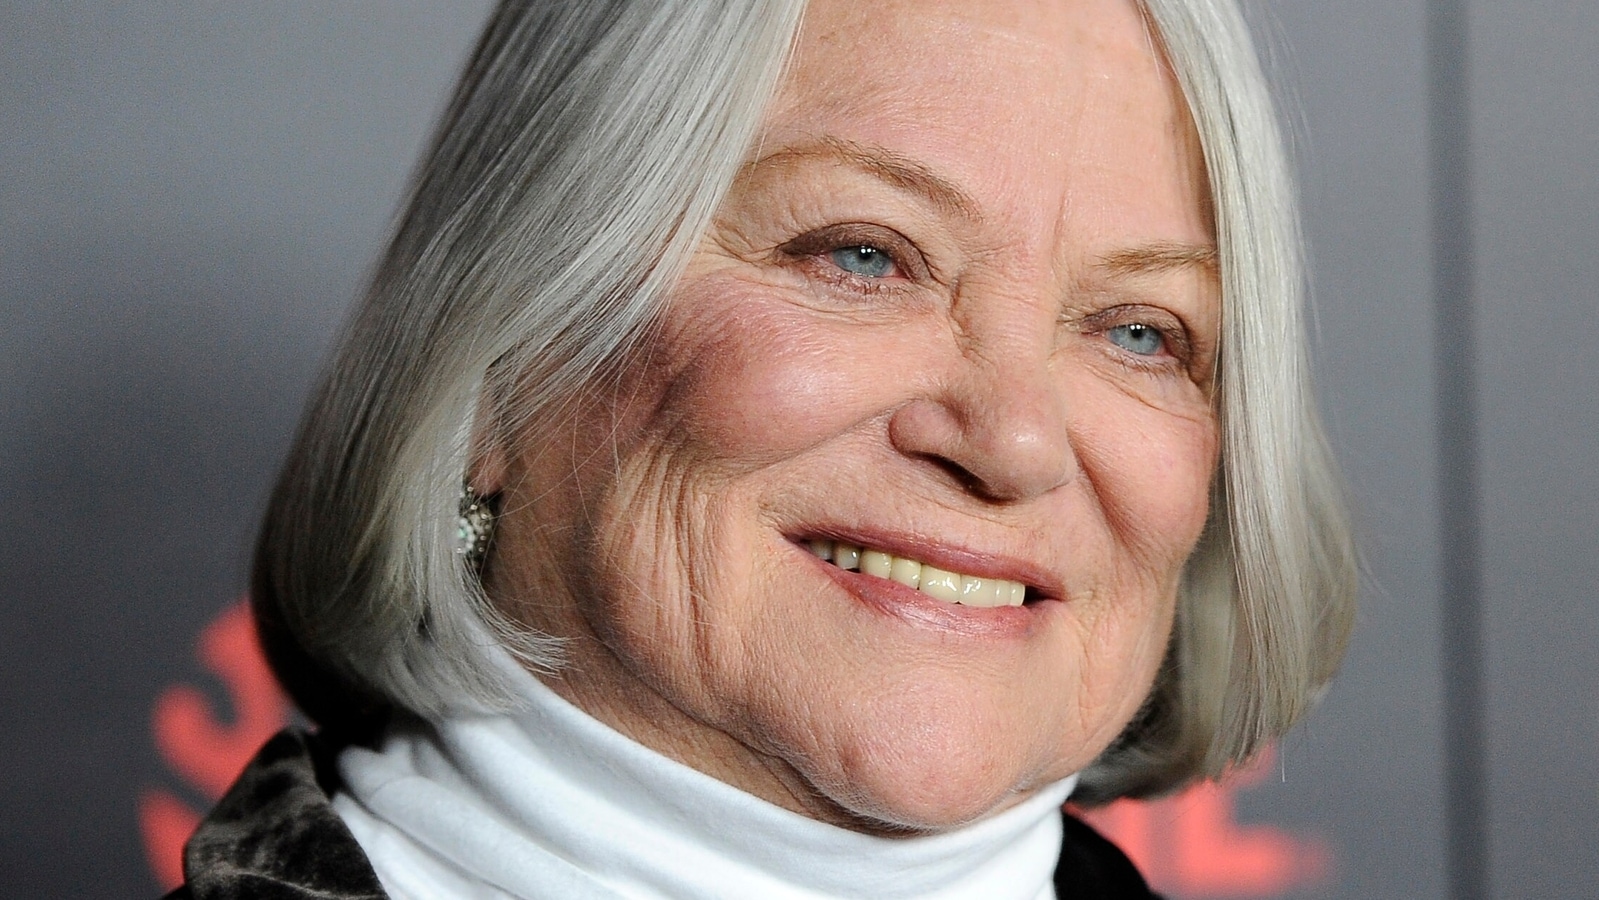 Louise Fletcher, Nurse Ratched, and the Making of One Flew Over